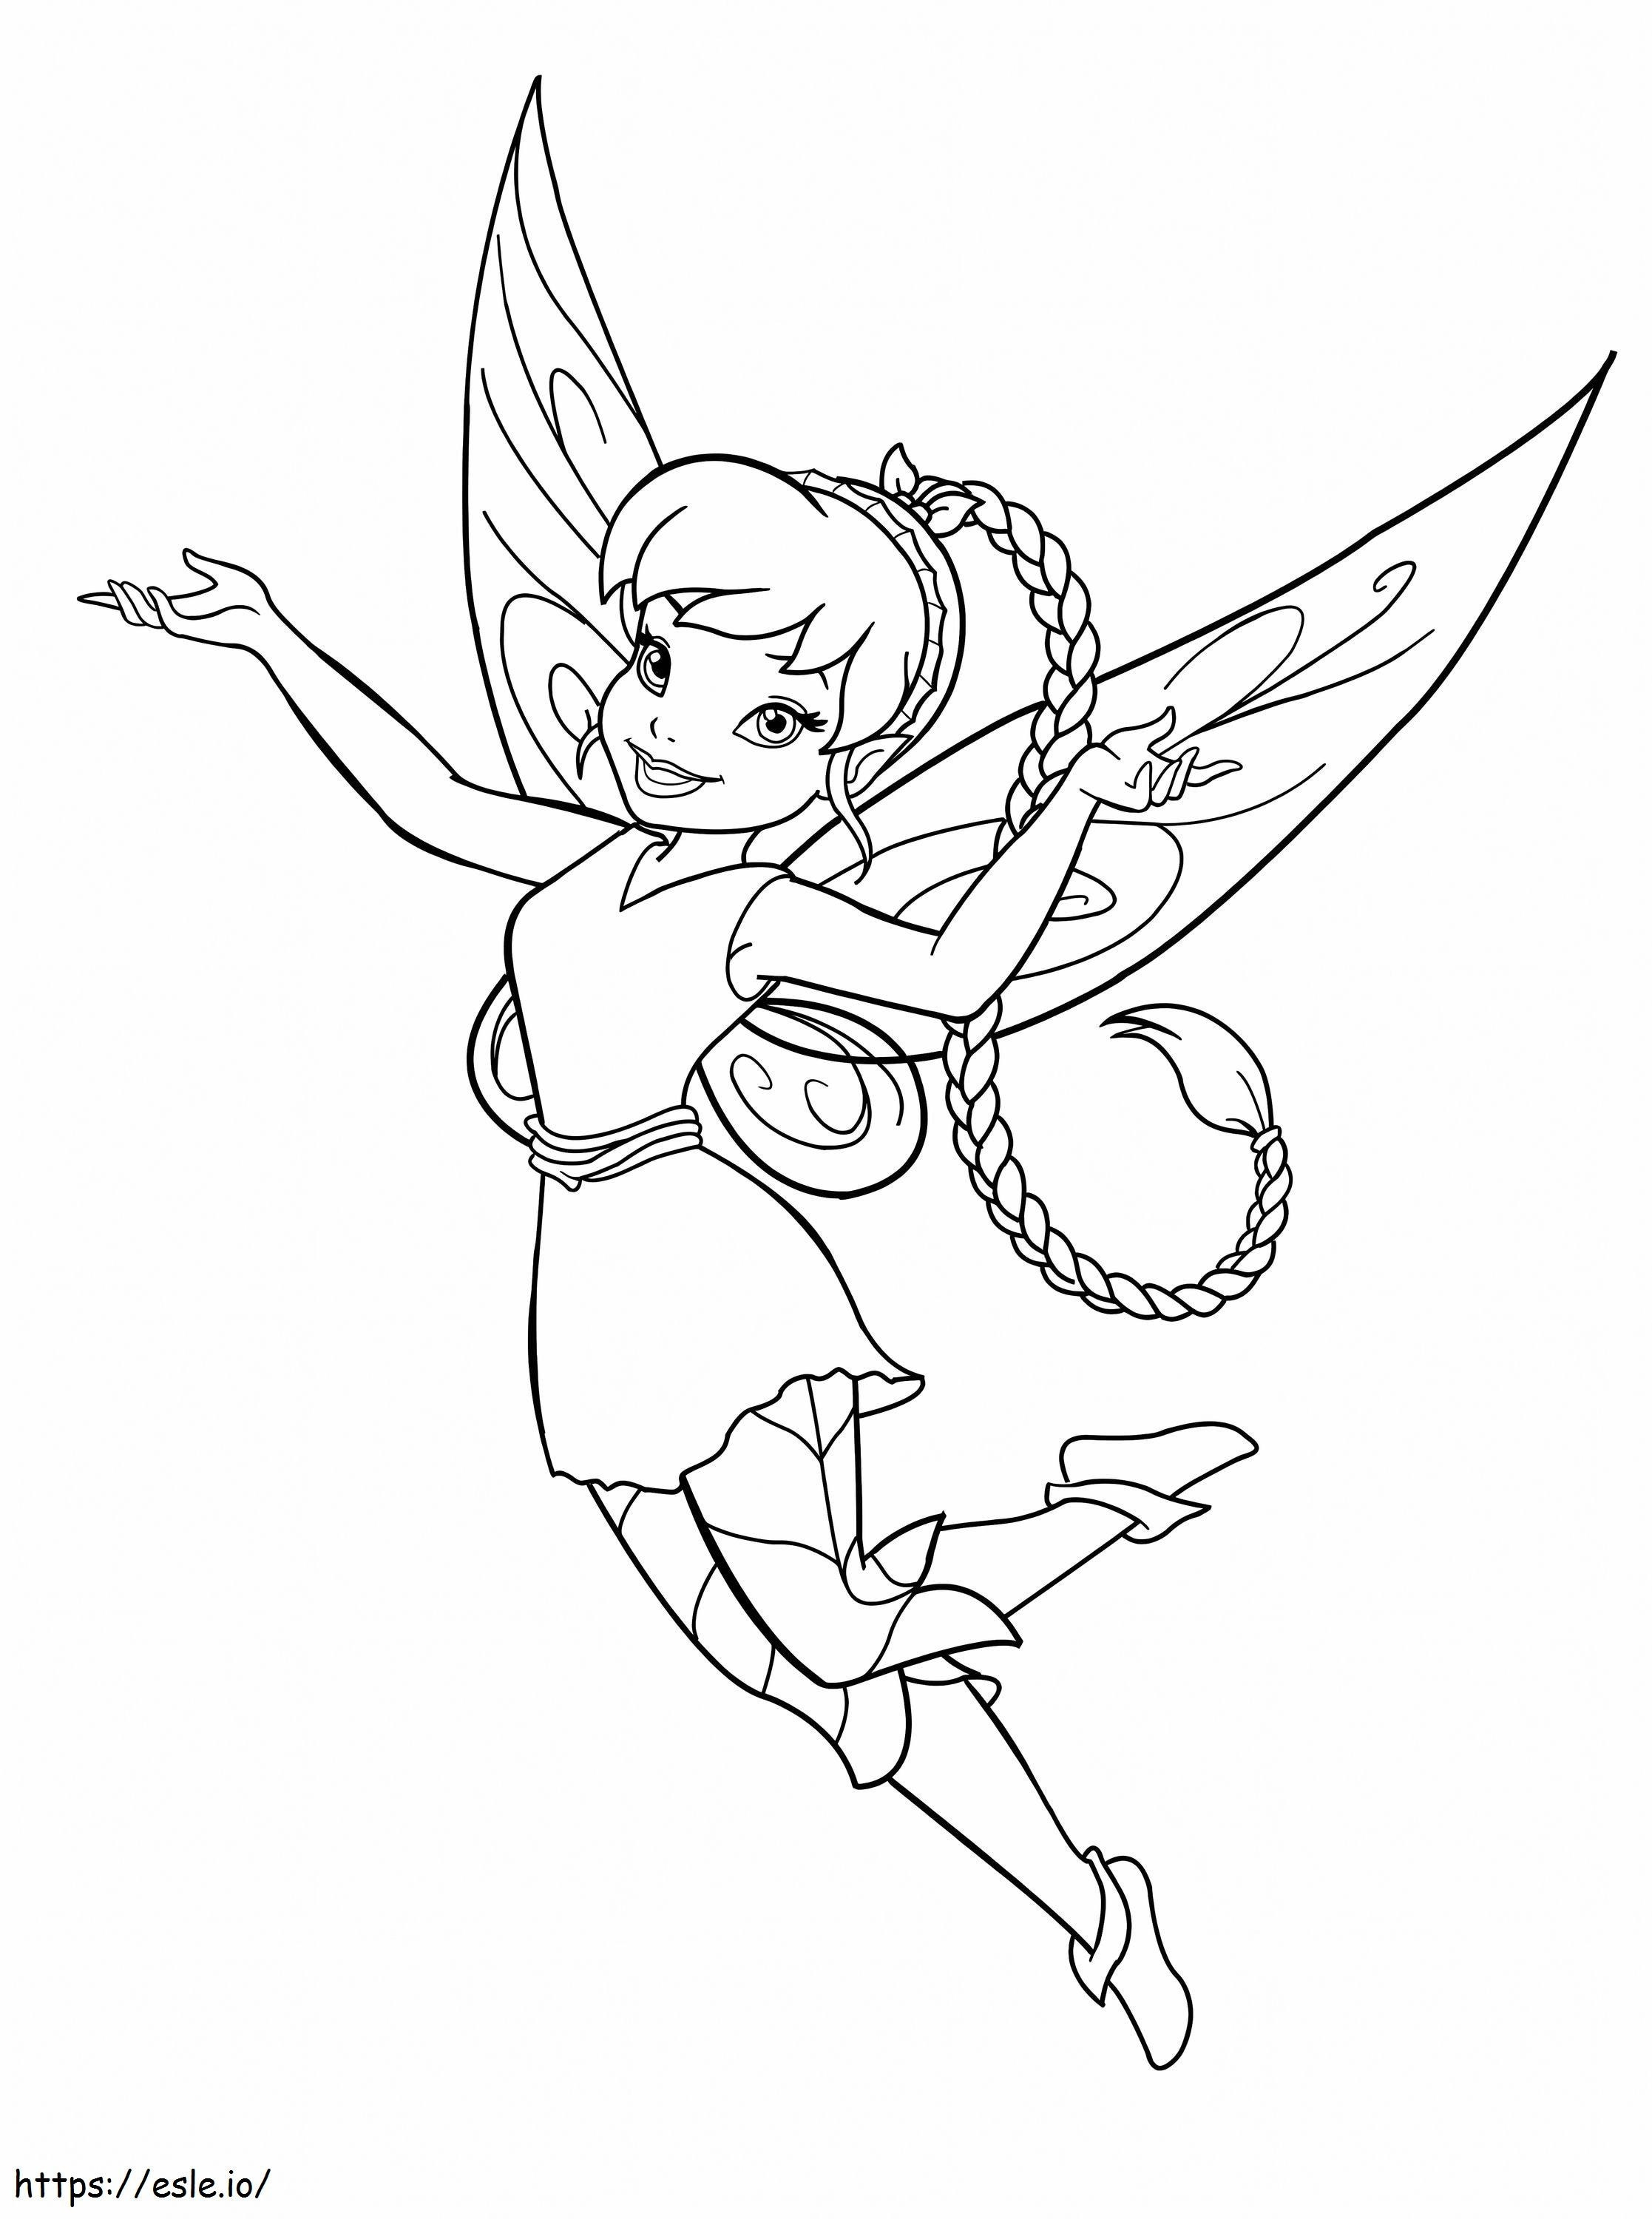 Cartoon Fairy Flying coloring page